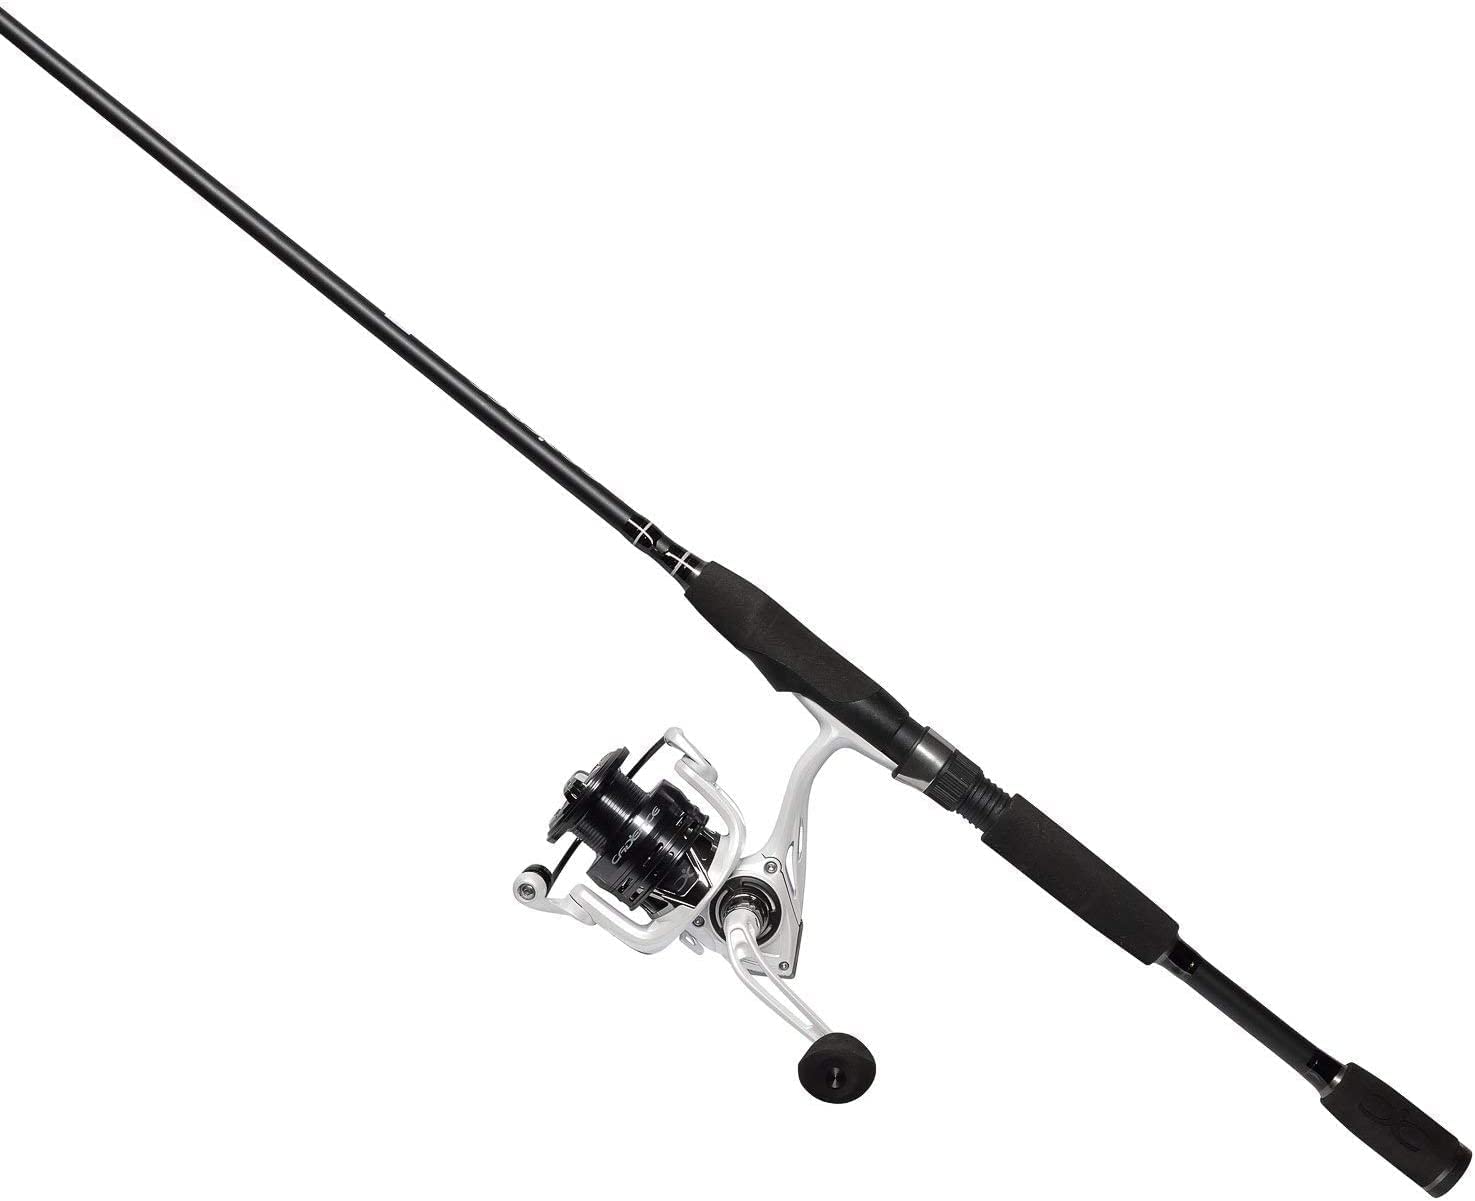 Best Bass Fishing Rod and Reel Combos: Cadence CC4 Spinning Combo Lightweight